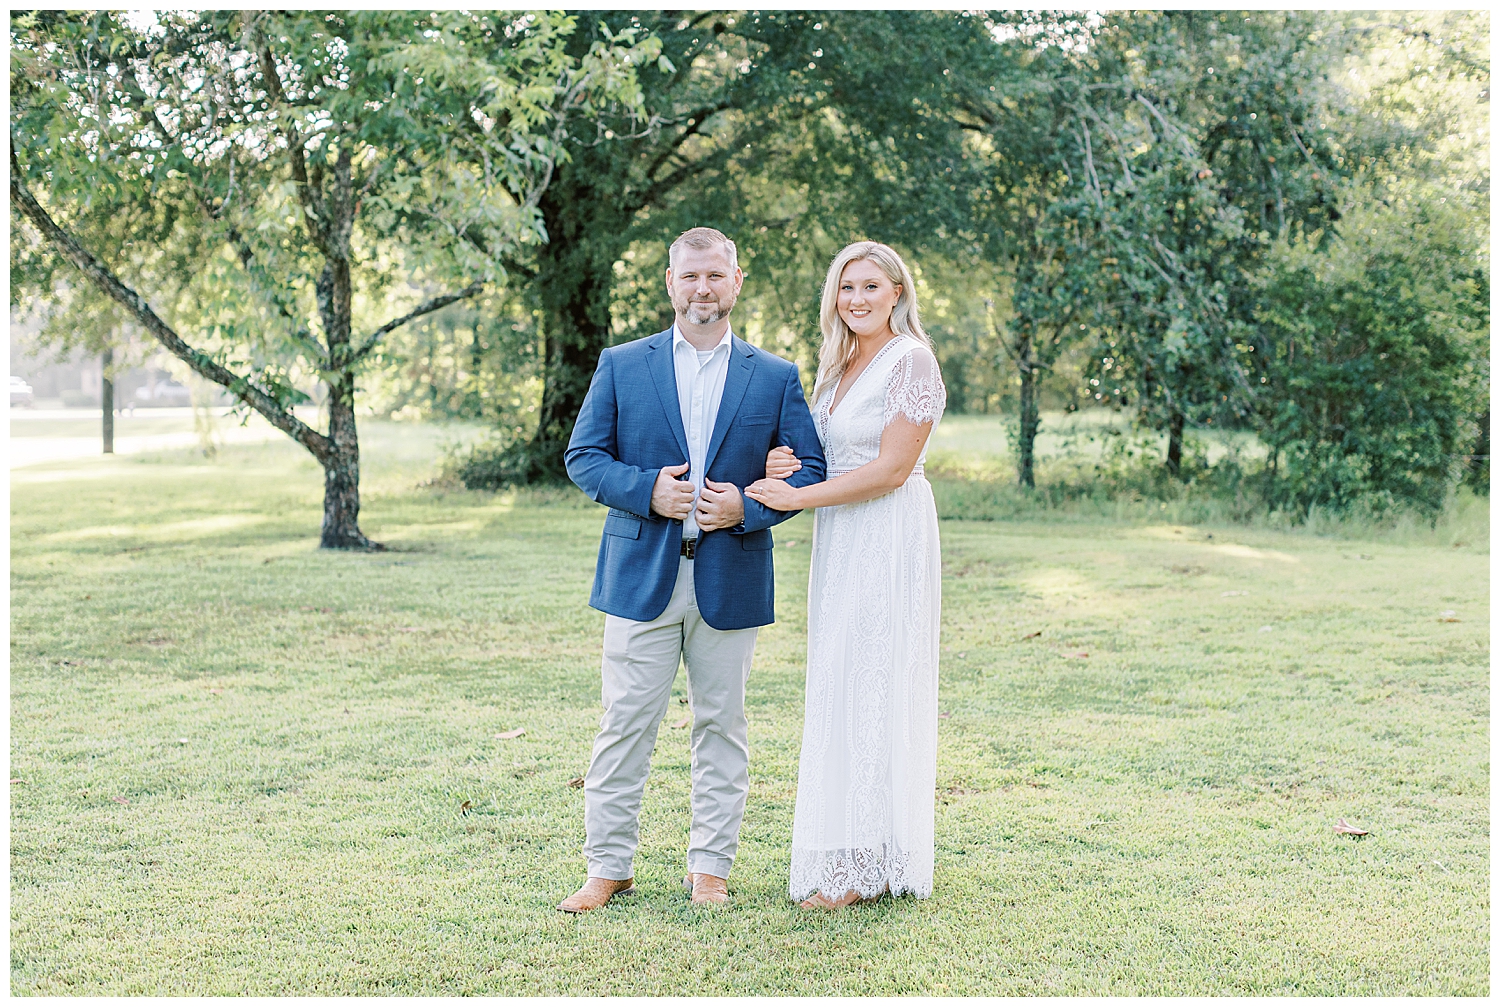 Juliann Riggs Photography captures engagement photos of an engaged couple smiling at the camera.